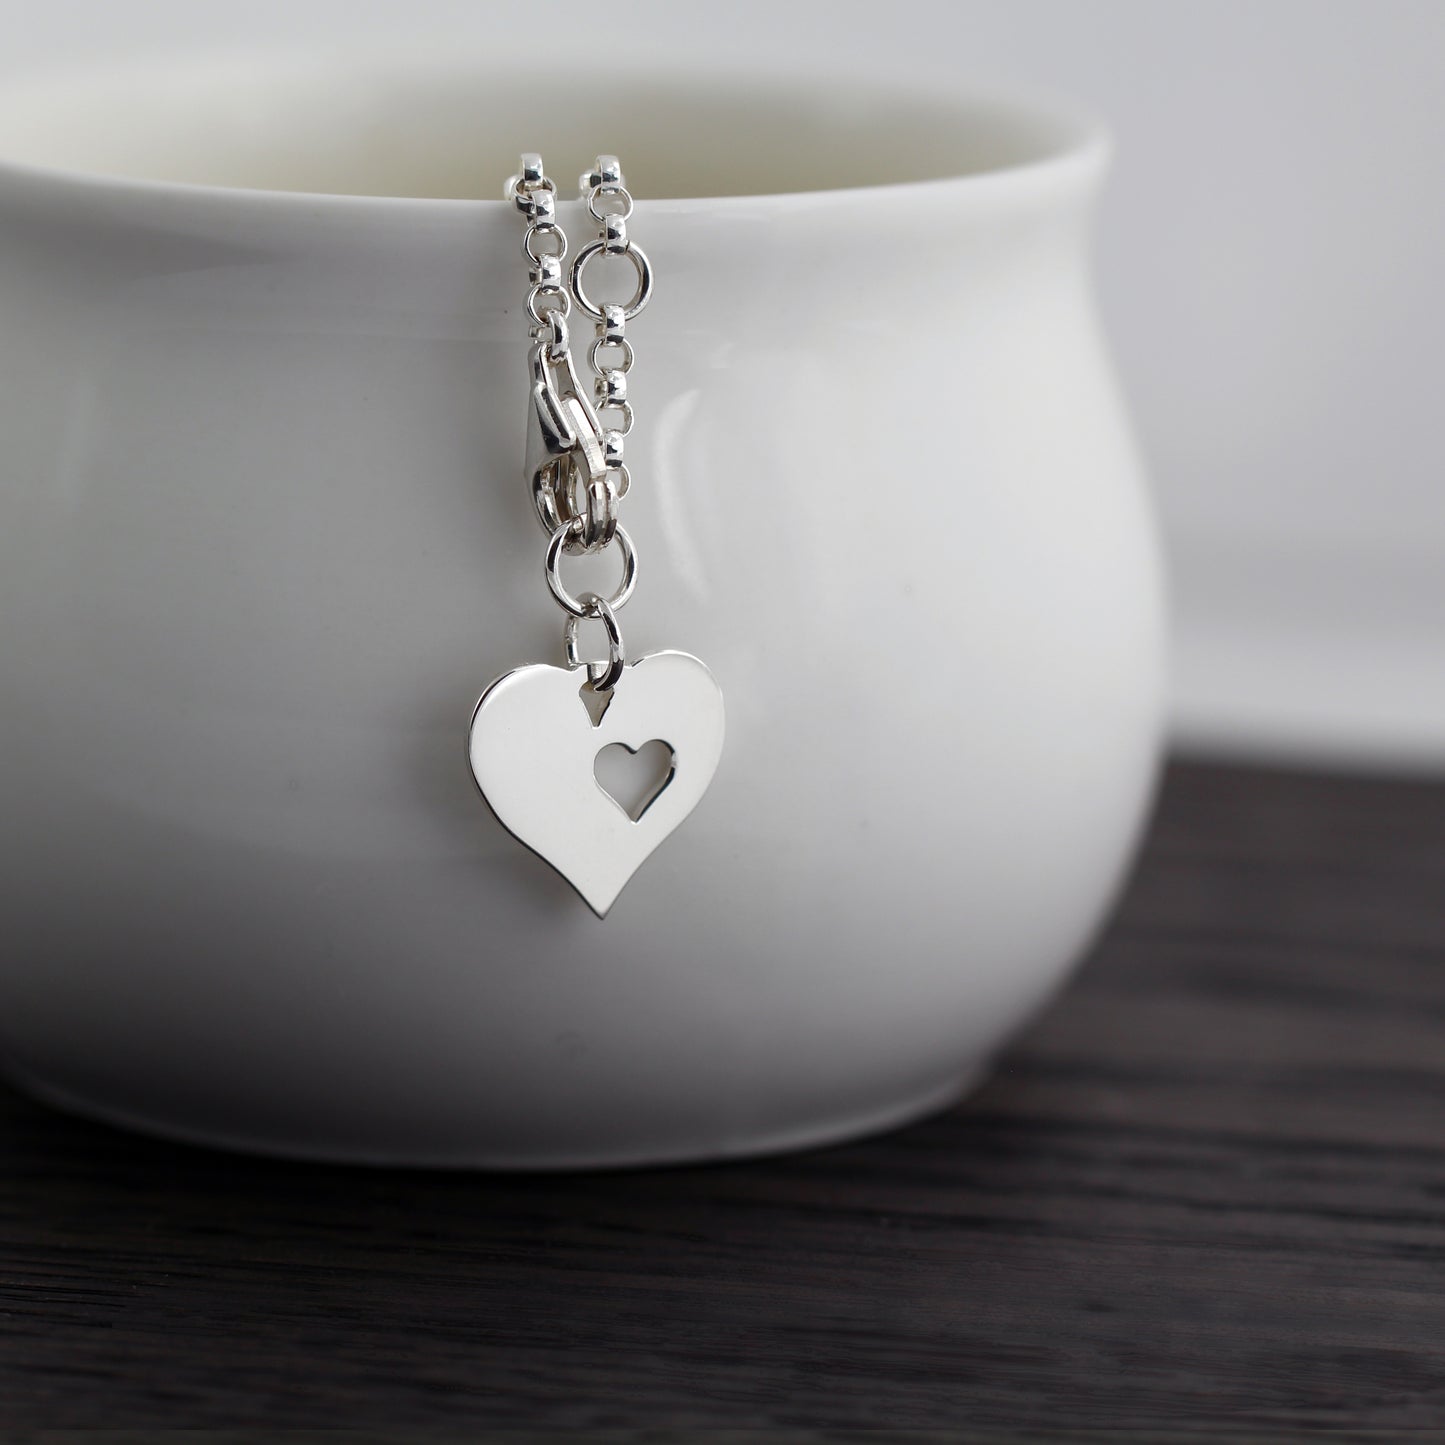 Silver Remembrance Charm Bracelet • Missing You, A Piece of My Heart is in Heaven • Gift for Loss of Loved One